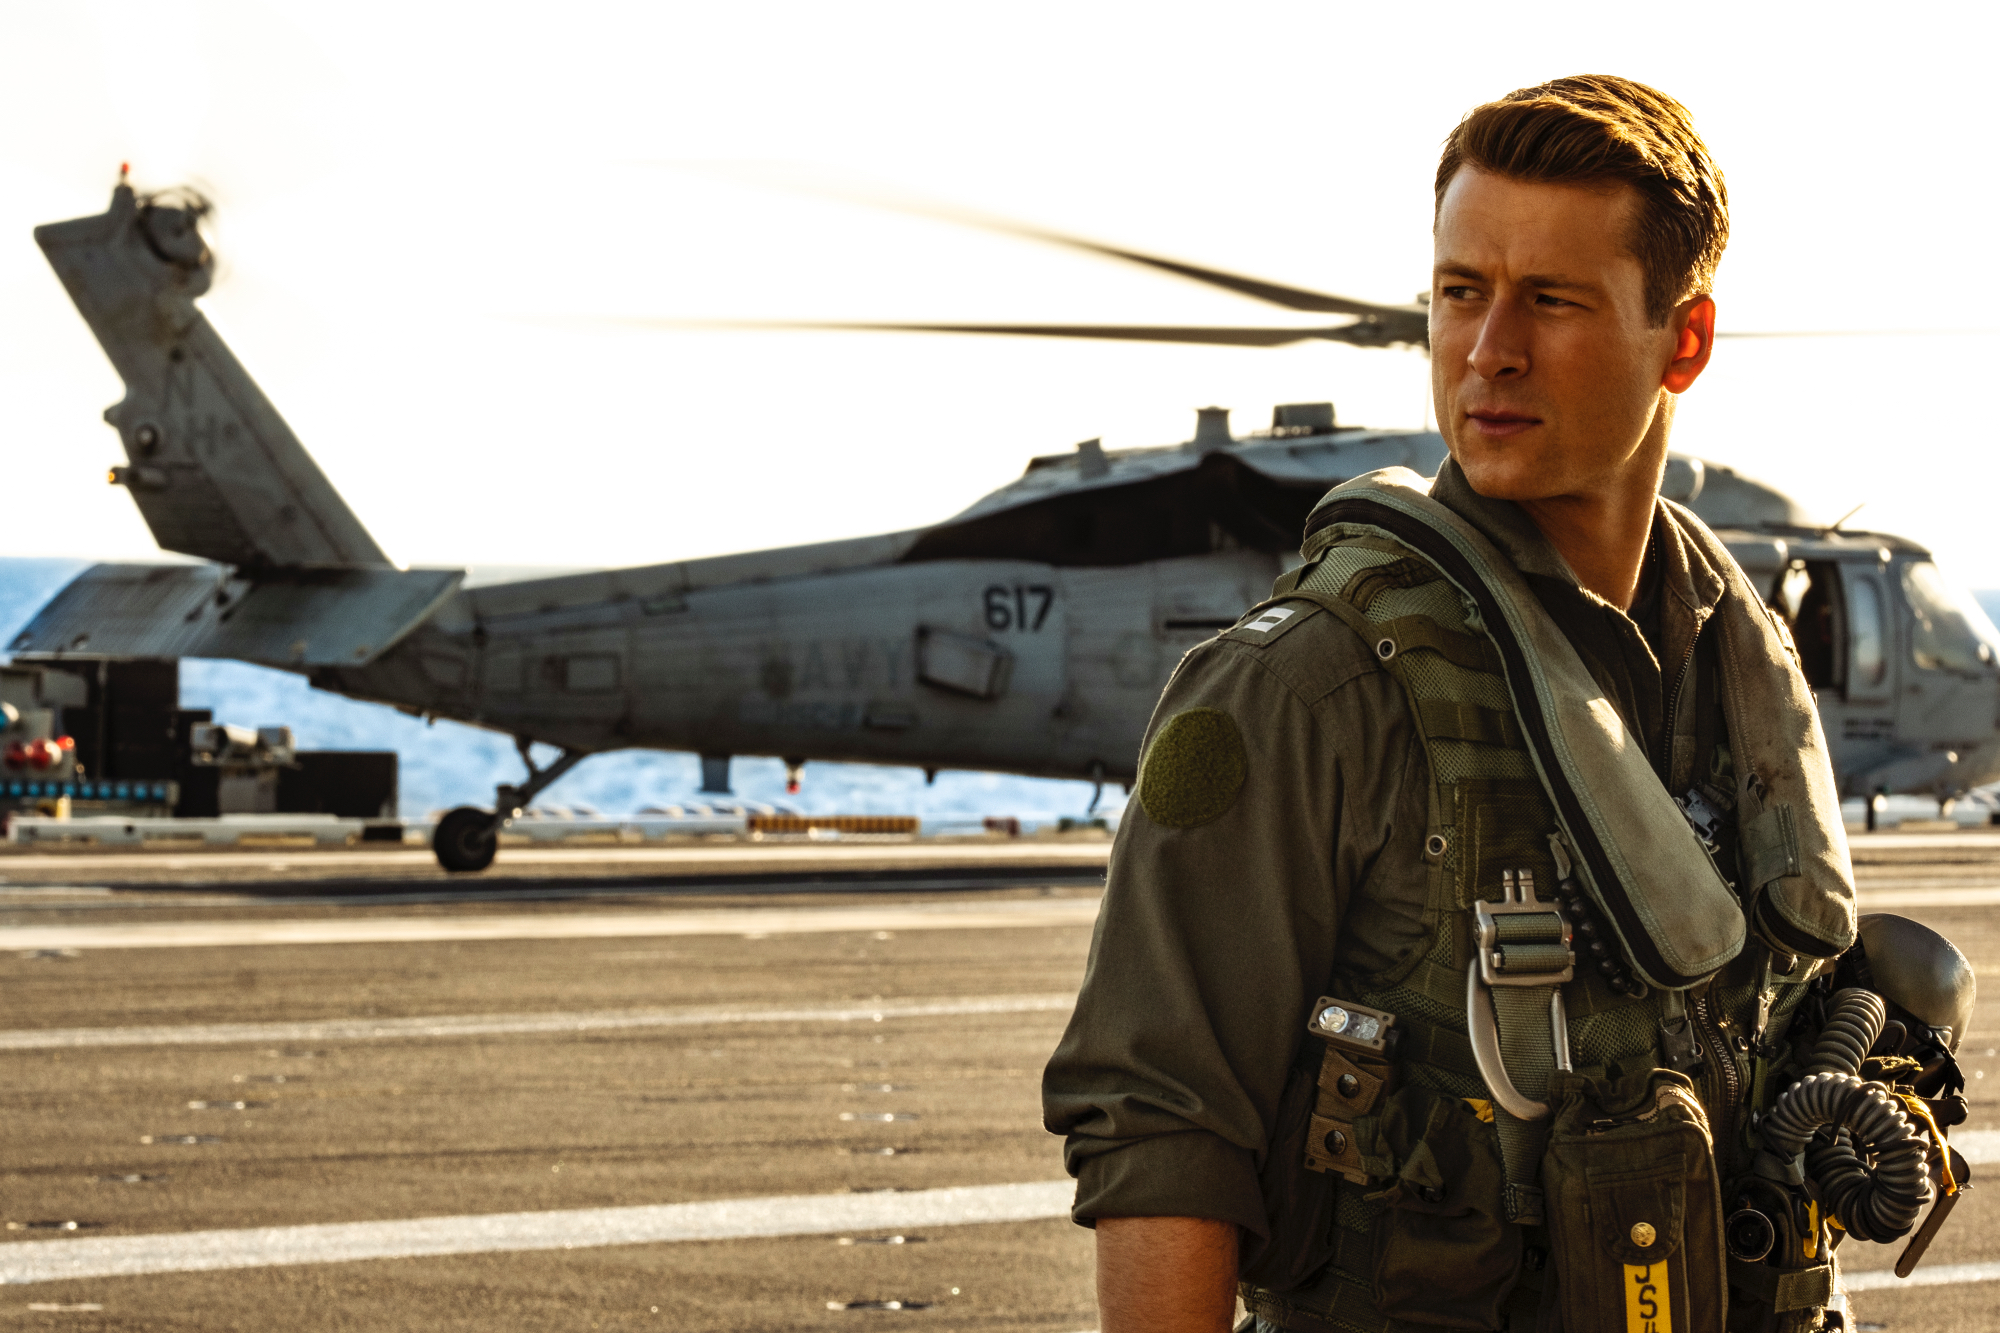 'Top Gun: Maverick' Glen Powell as Hangman wearing his pilot uniform and looking to the side with a helicopter in the background